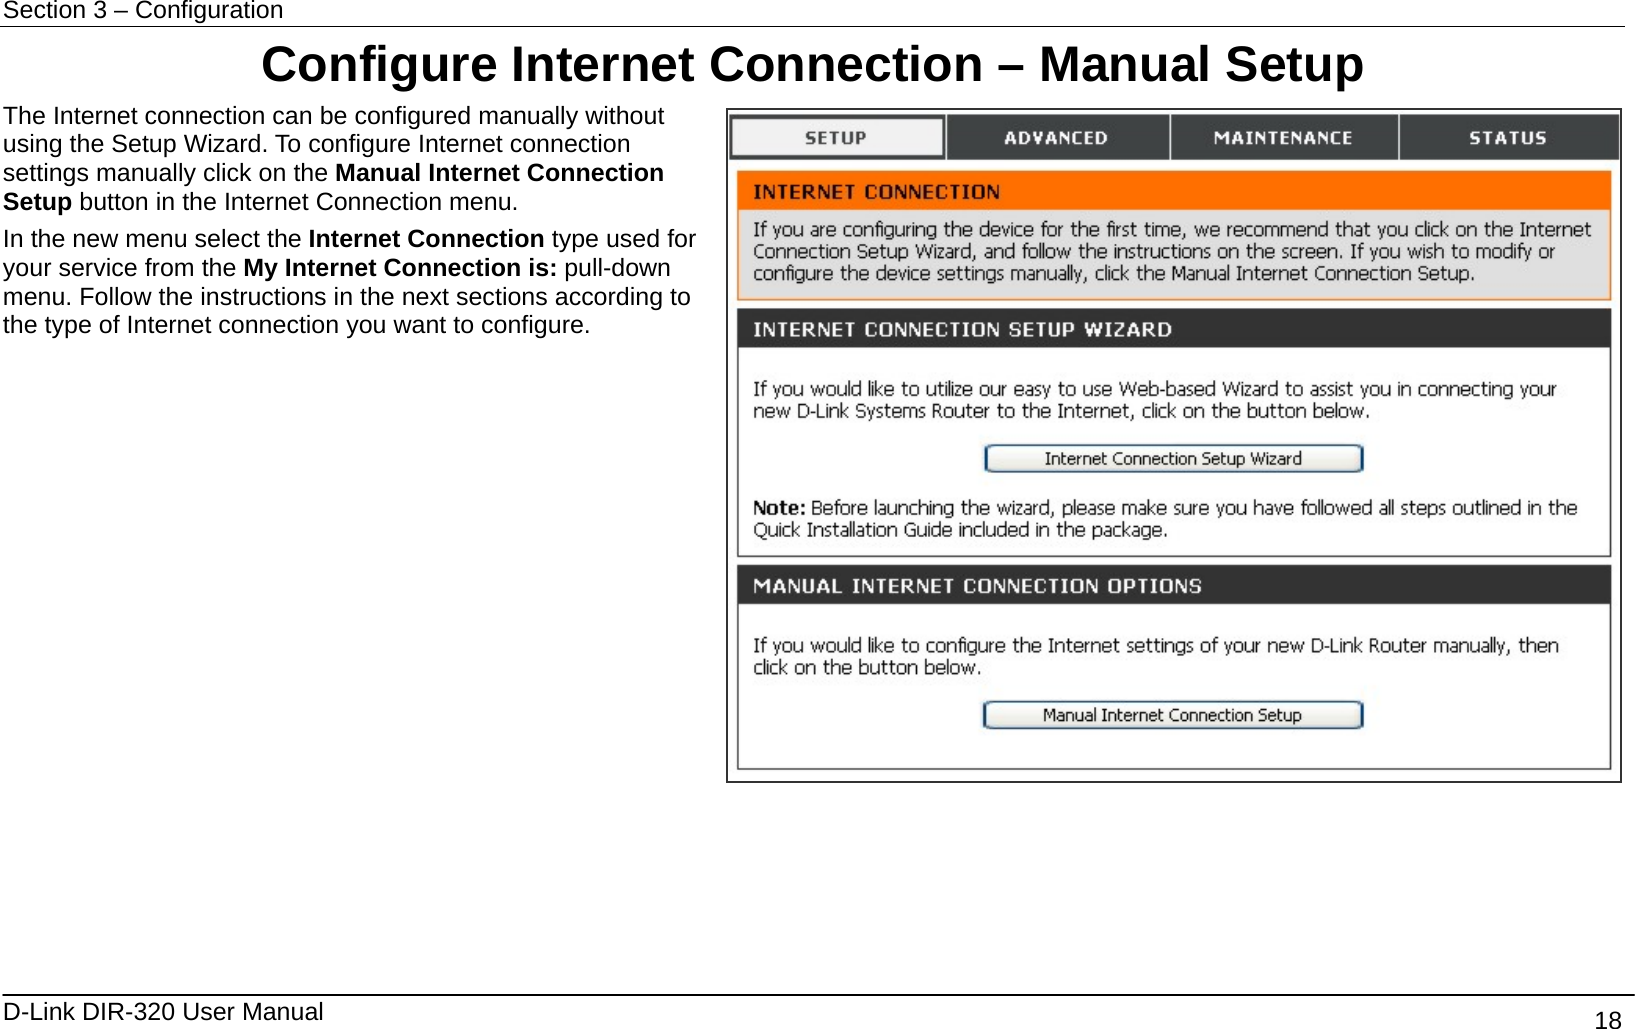 Section 3 – Configuration   D-Link DIR-320 User Manual                                       18 Configure Internet Connection – Manual Setup The Internet connection can be configured manually without using the Setup Wizard. To configure Internet connection settings manually click on the Manual Internet Connection Setup button in the Internet Connection menu. In the new menu select the Internet Connection type used for your service from the My Internet Connection is: pull-down menu. Follow the instructions in the next sections according to the type of Internet connection you want to configure.                  